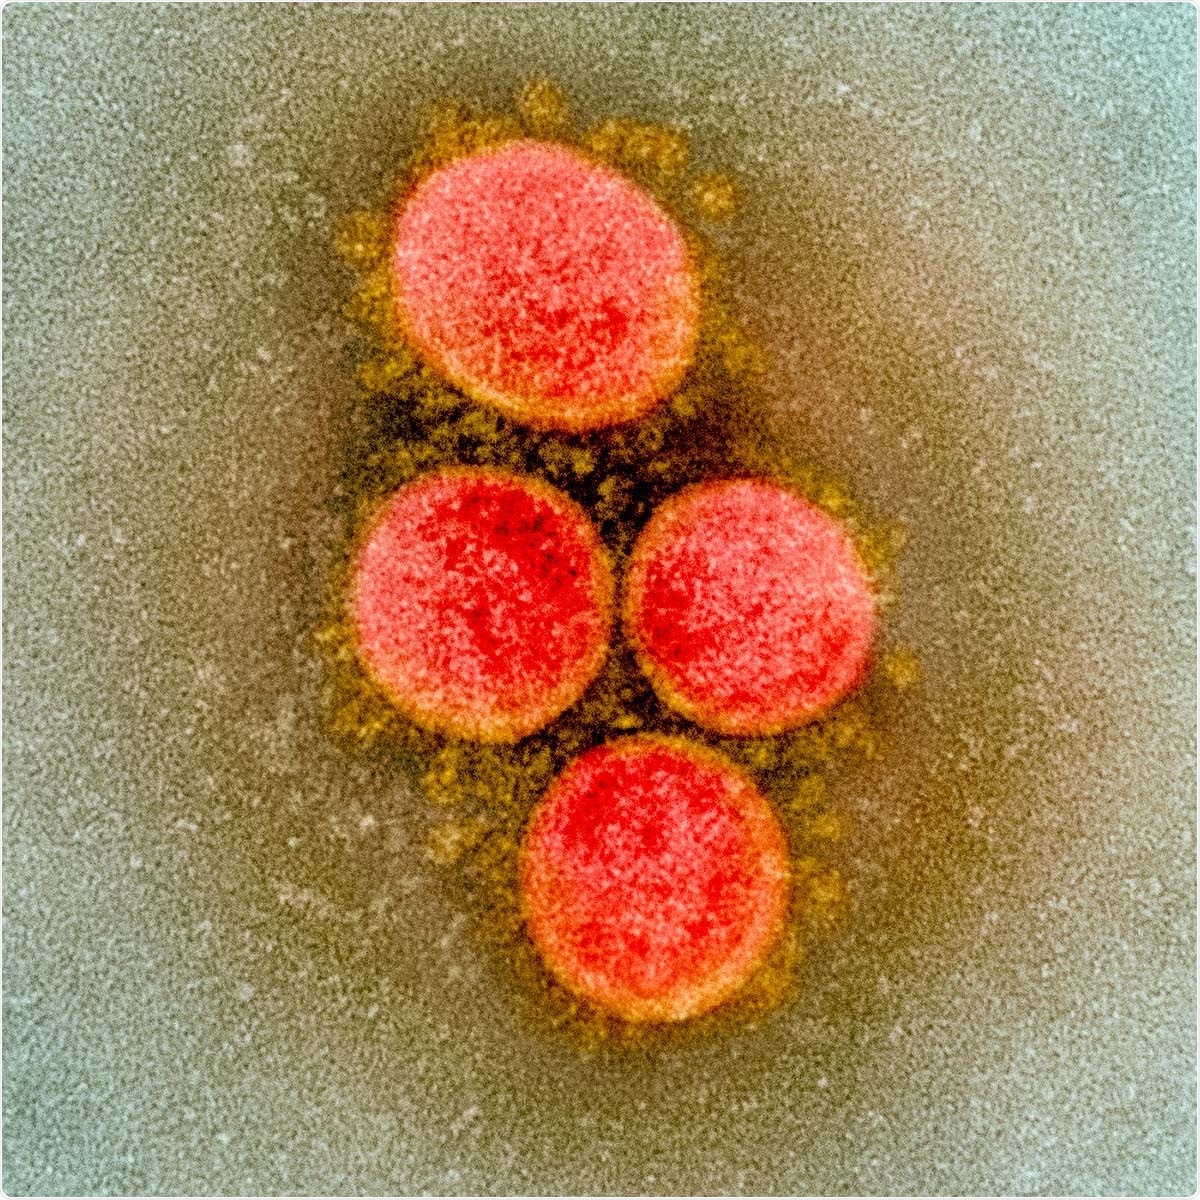 Transmission electron micrograph of SARS-CoV-2 virus particles, isolated from a patient. Image captured and color-enhanced at the NIAID Integrated Research Facility (IRF) in Fort Detrick, Maryland. Image Credit: NIAID / Flickr